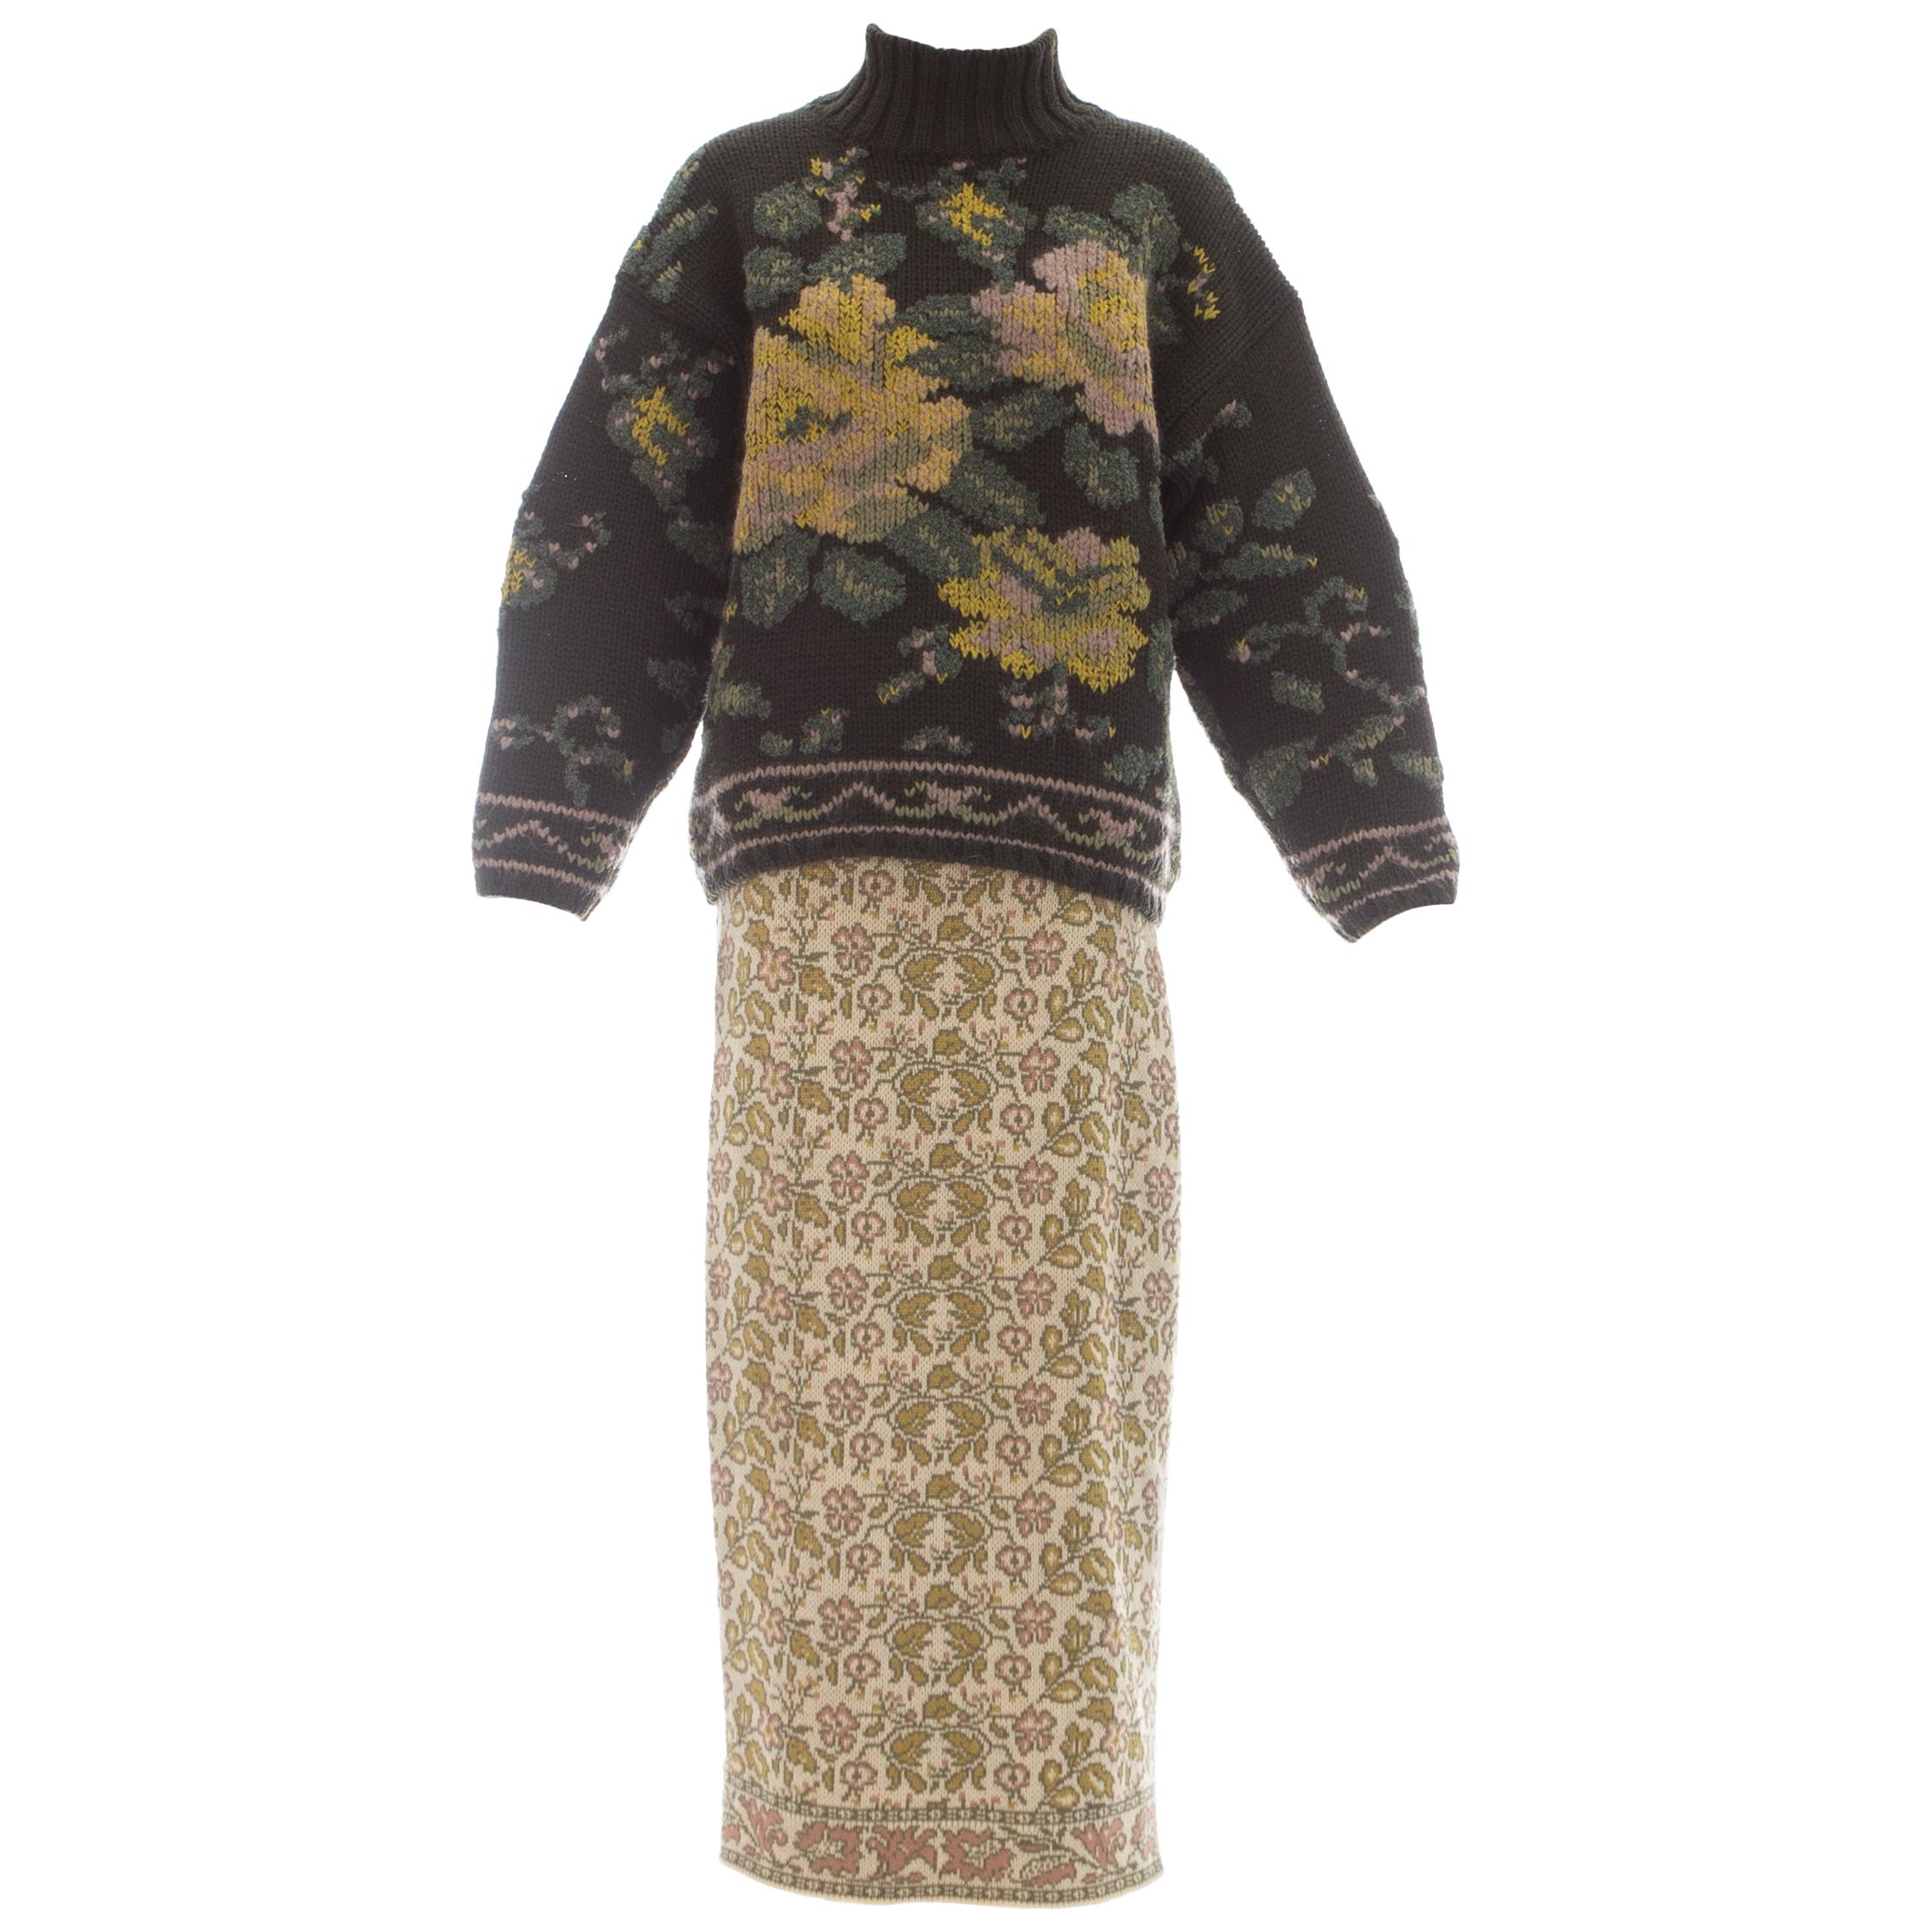 Jean Paul Gaultier knitted wool floral tapestry sweater and skirt set, fw 1984